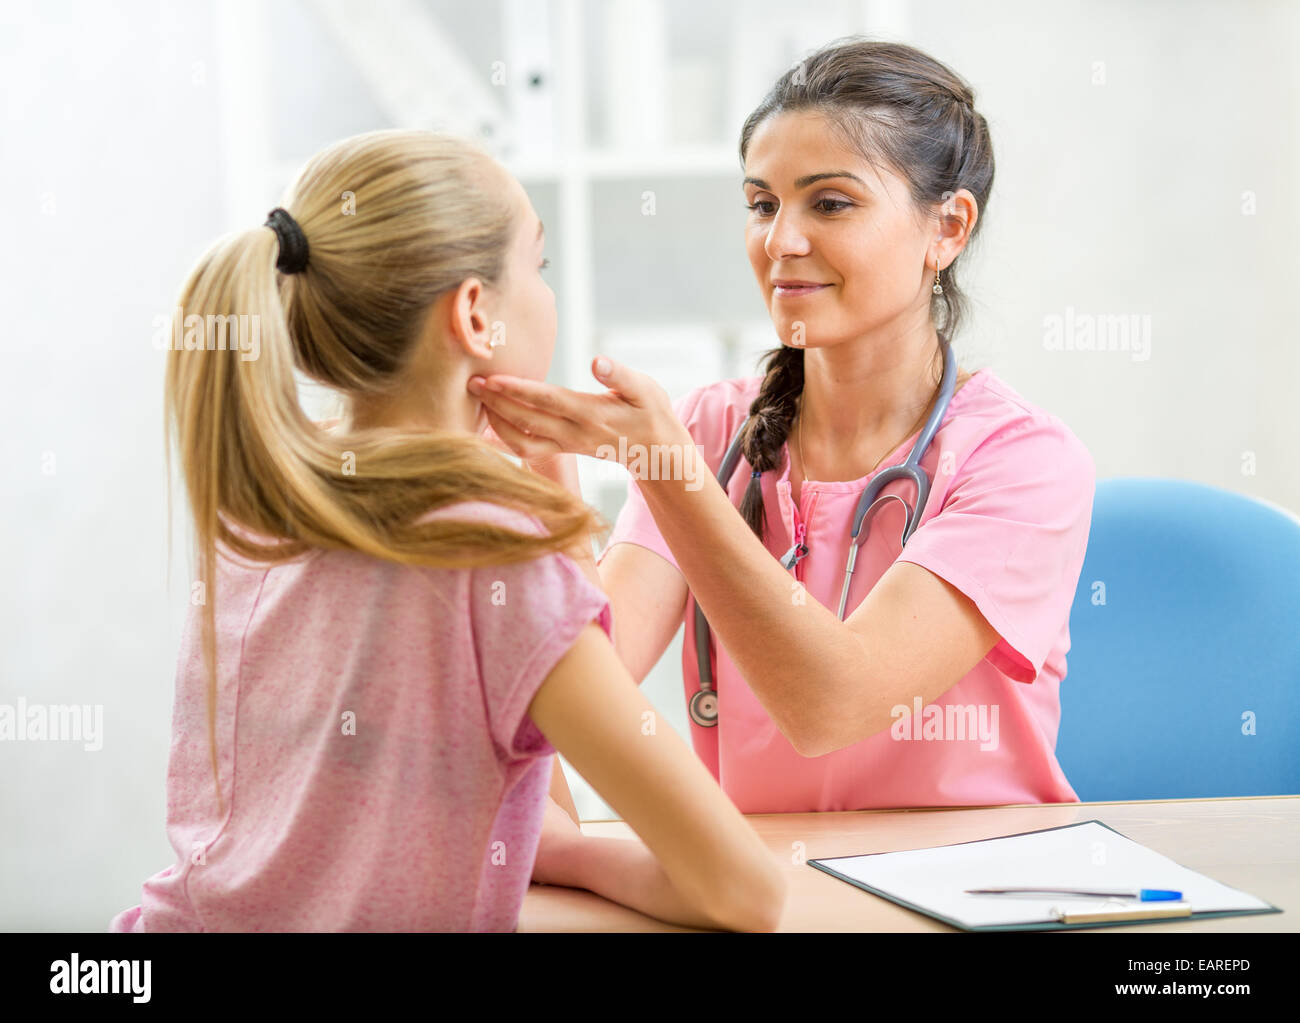 Doctor examining patient adolescent at office Banque D'Images